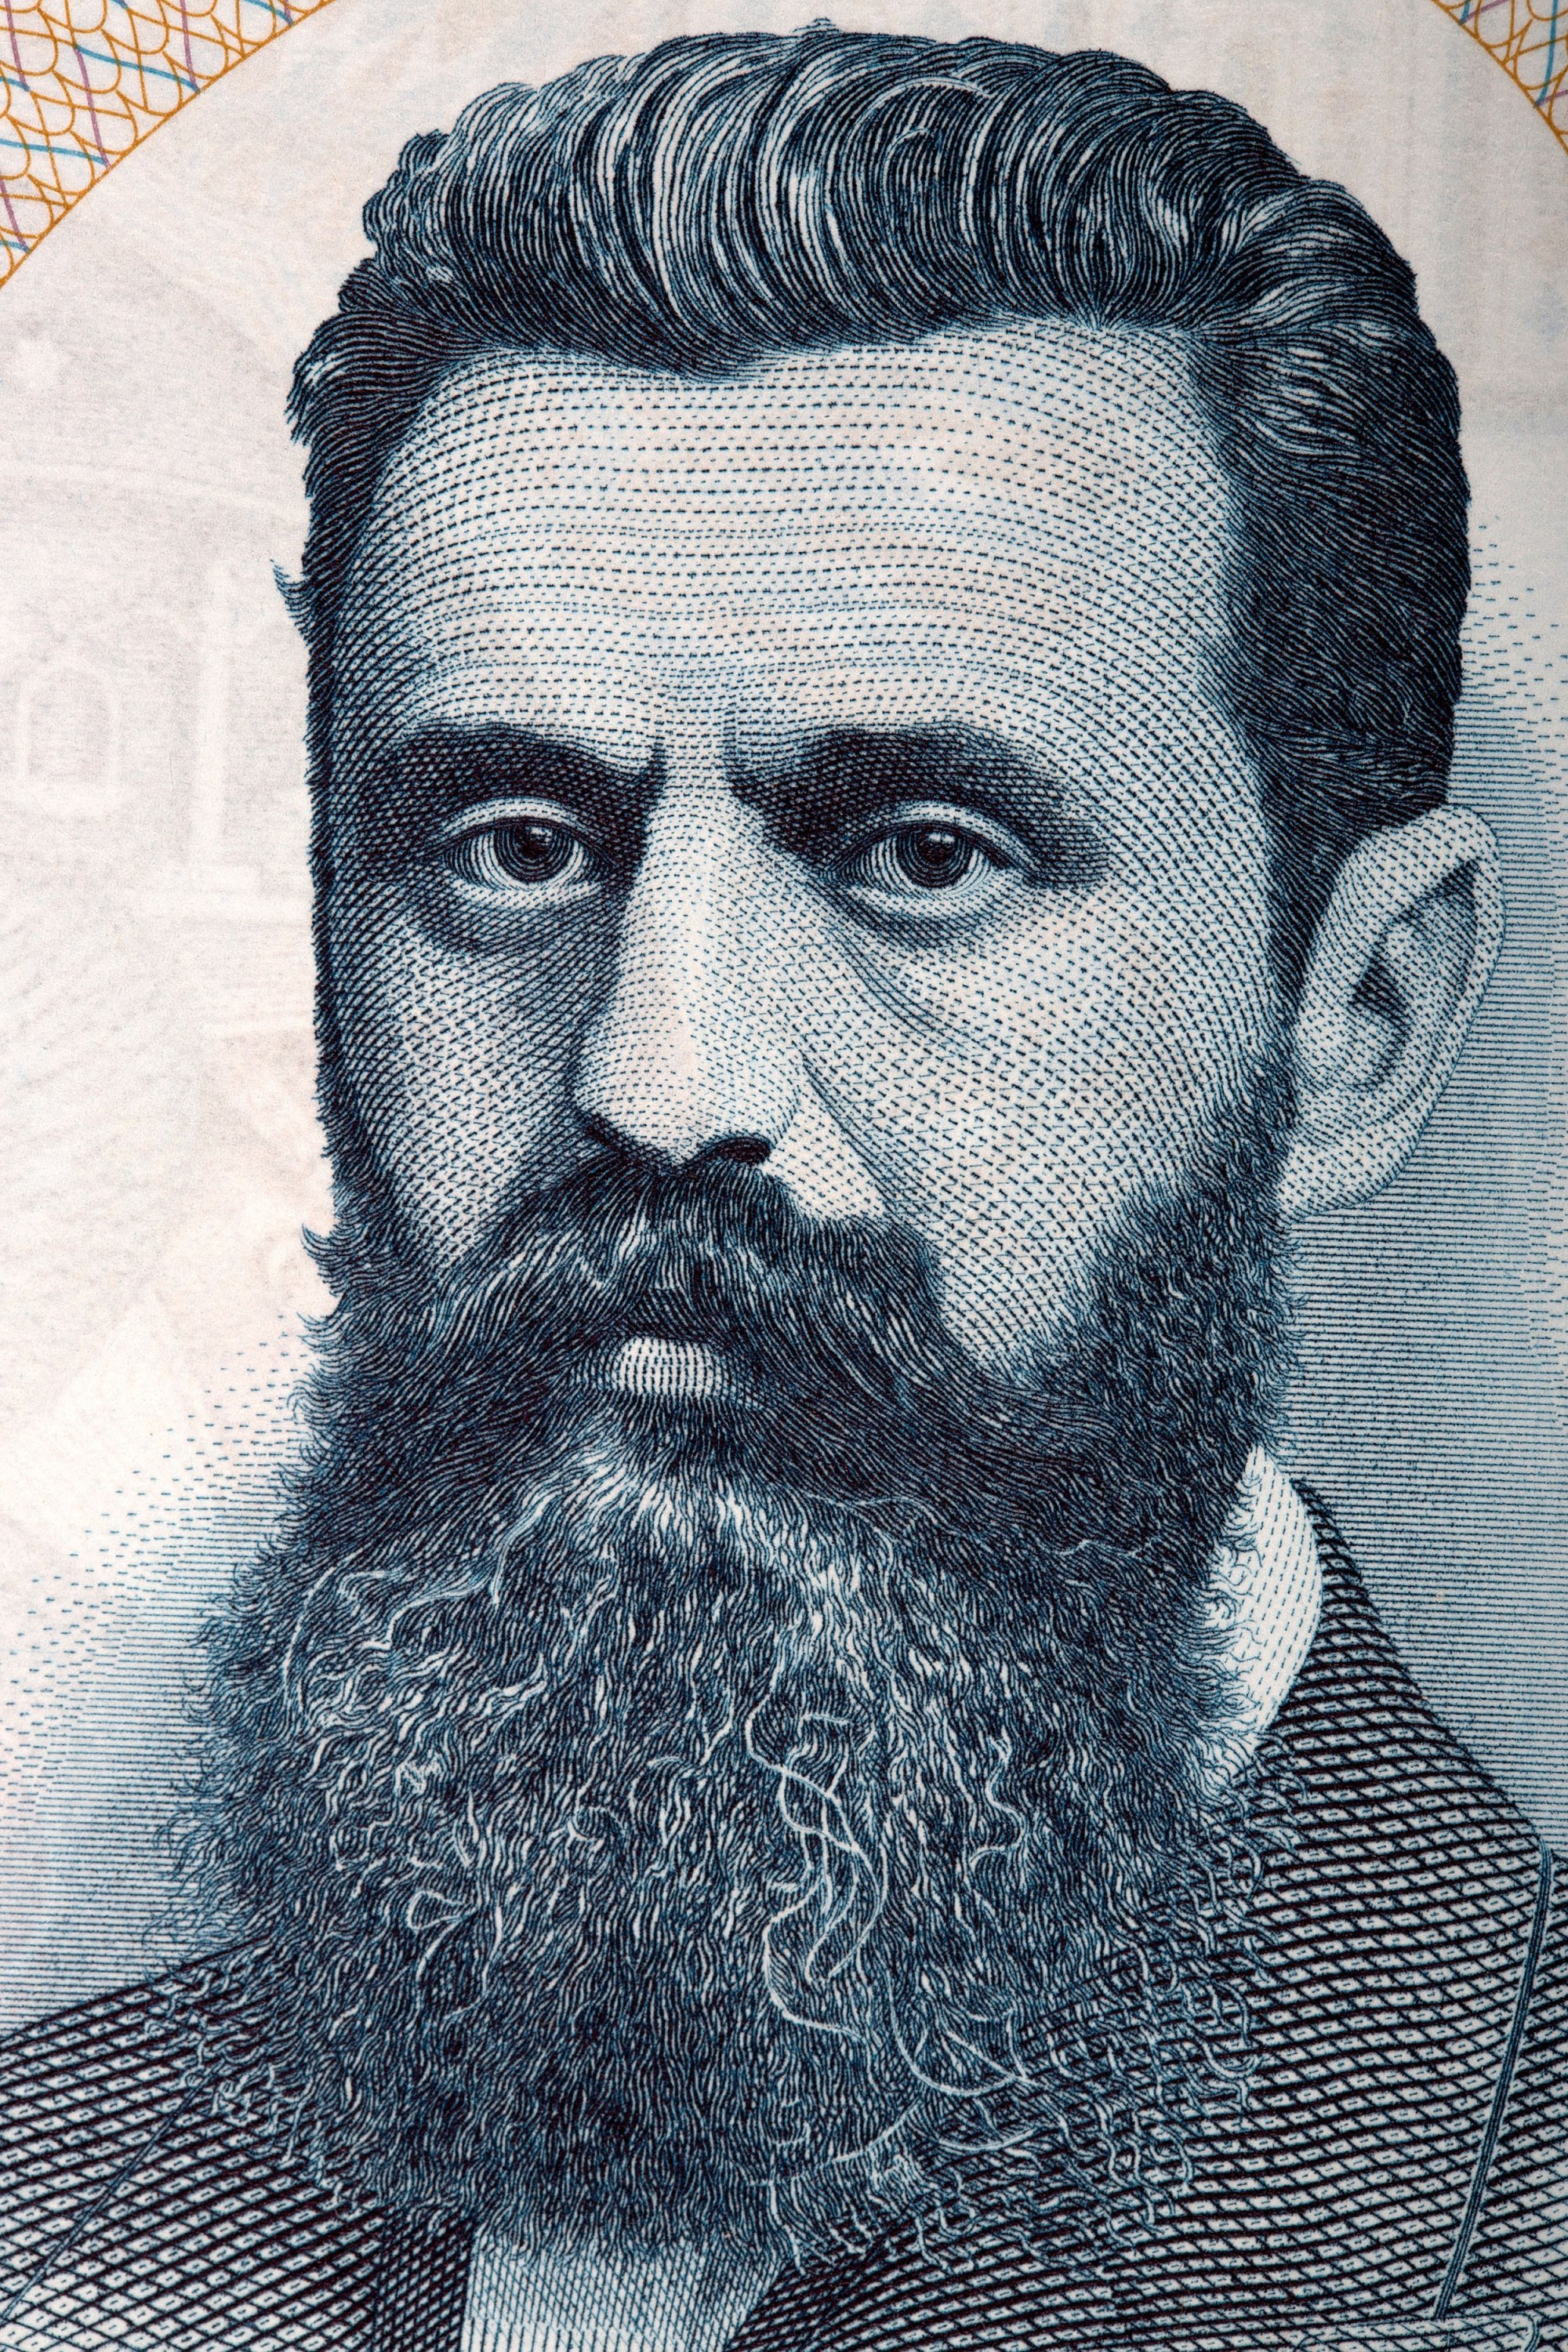 The portrait of Zionist figure Theodor Herzl taken from old Israeli currency.